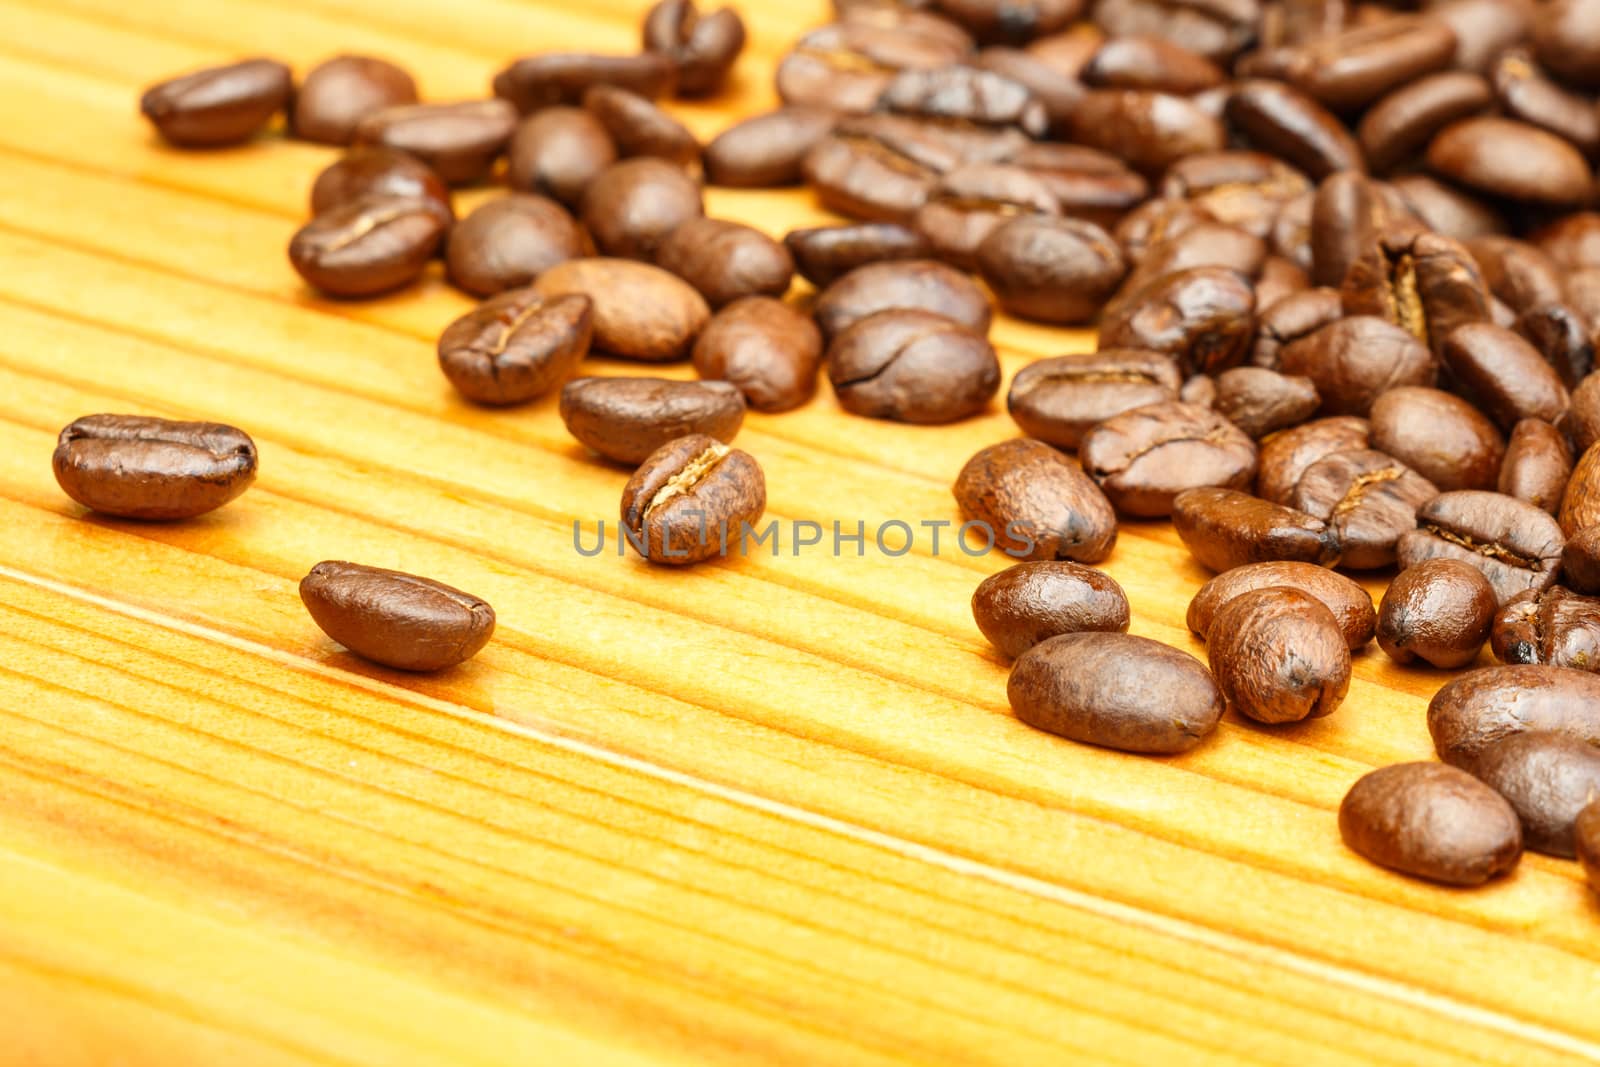 coffee beans on wooden table by stockdevil